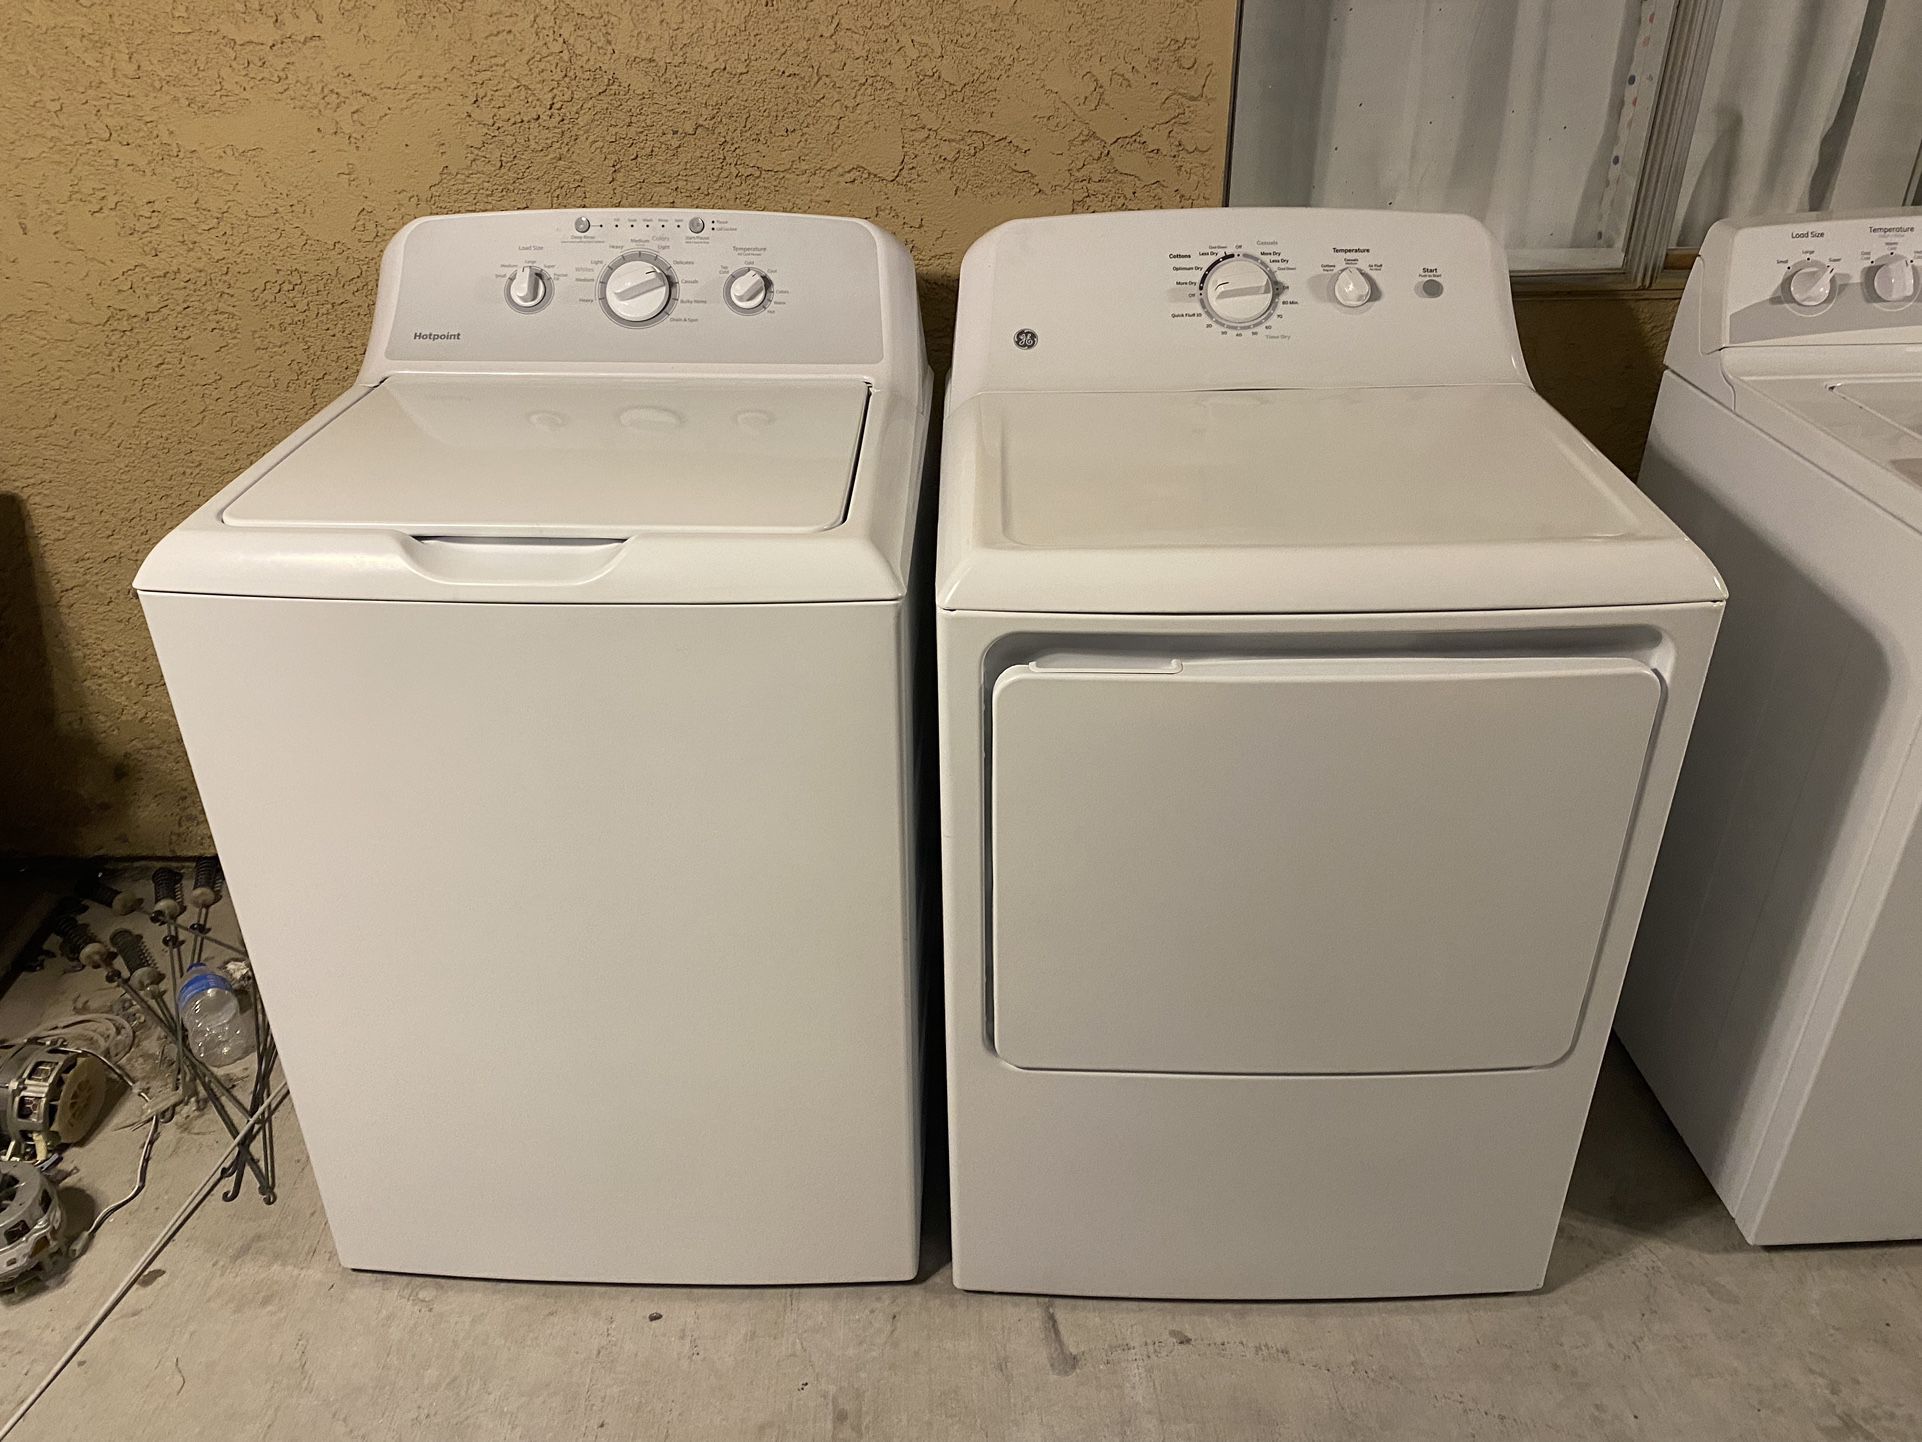 Electric Dryer GE And Washer Hotpoint 60 Days Of Warranty Free Delivery 